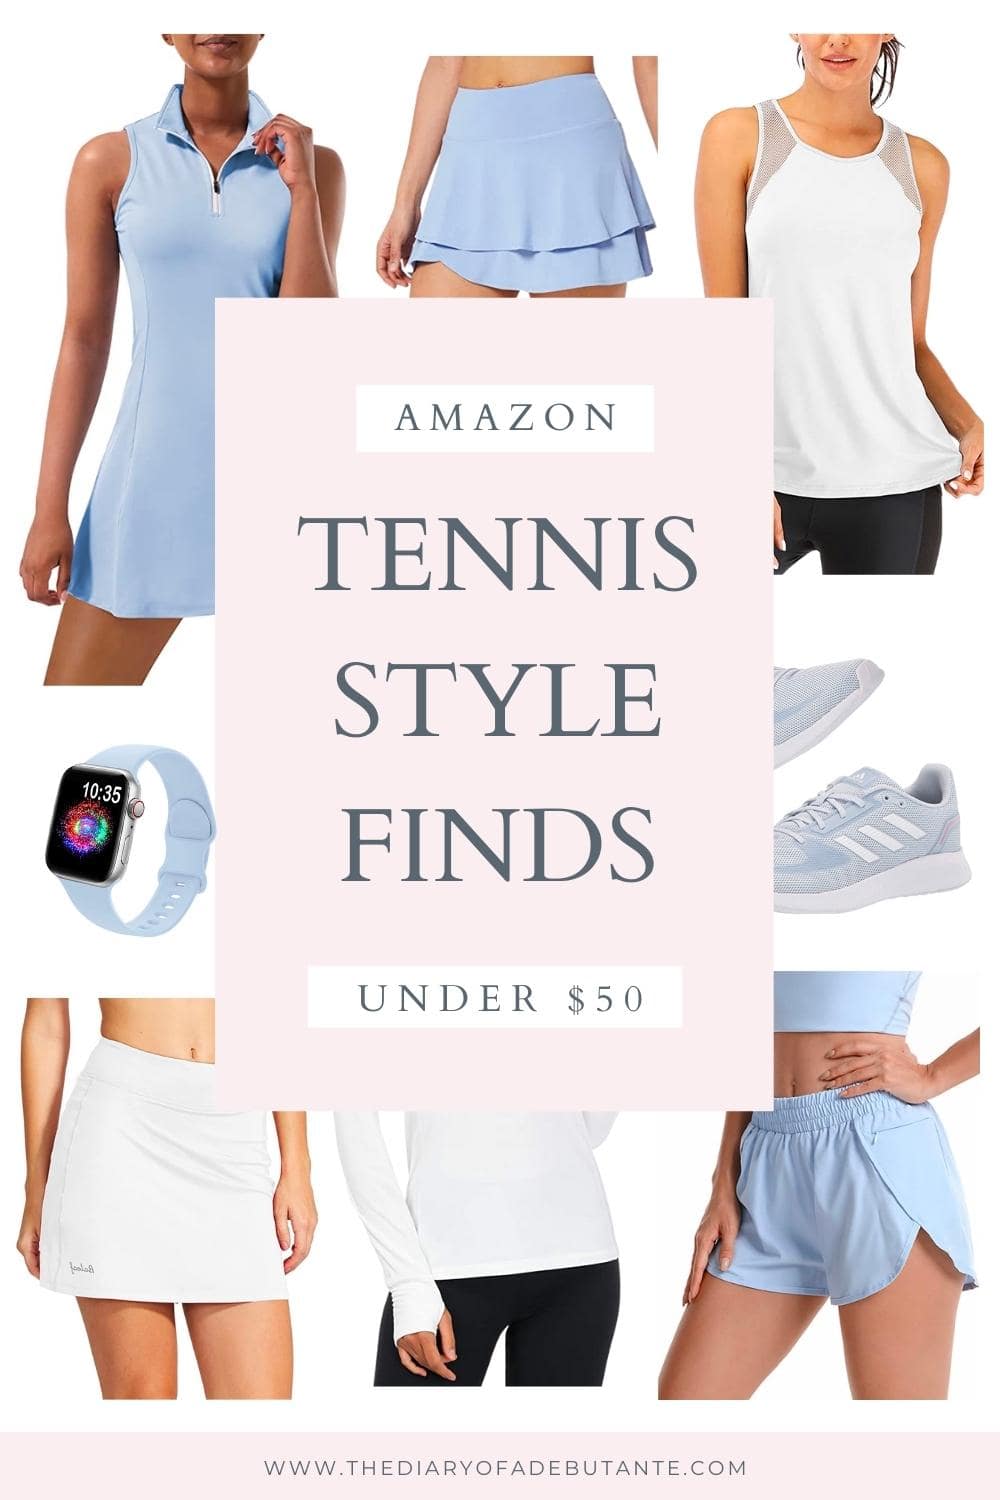 Affordable fashion blogger Stephanie Ziajka shares cute tennis outfit ideas on Diary of a Debutante